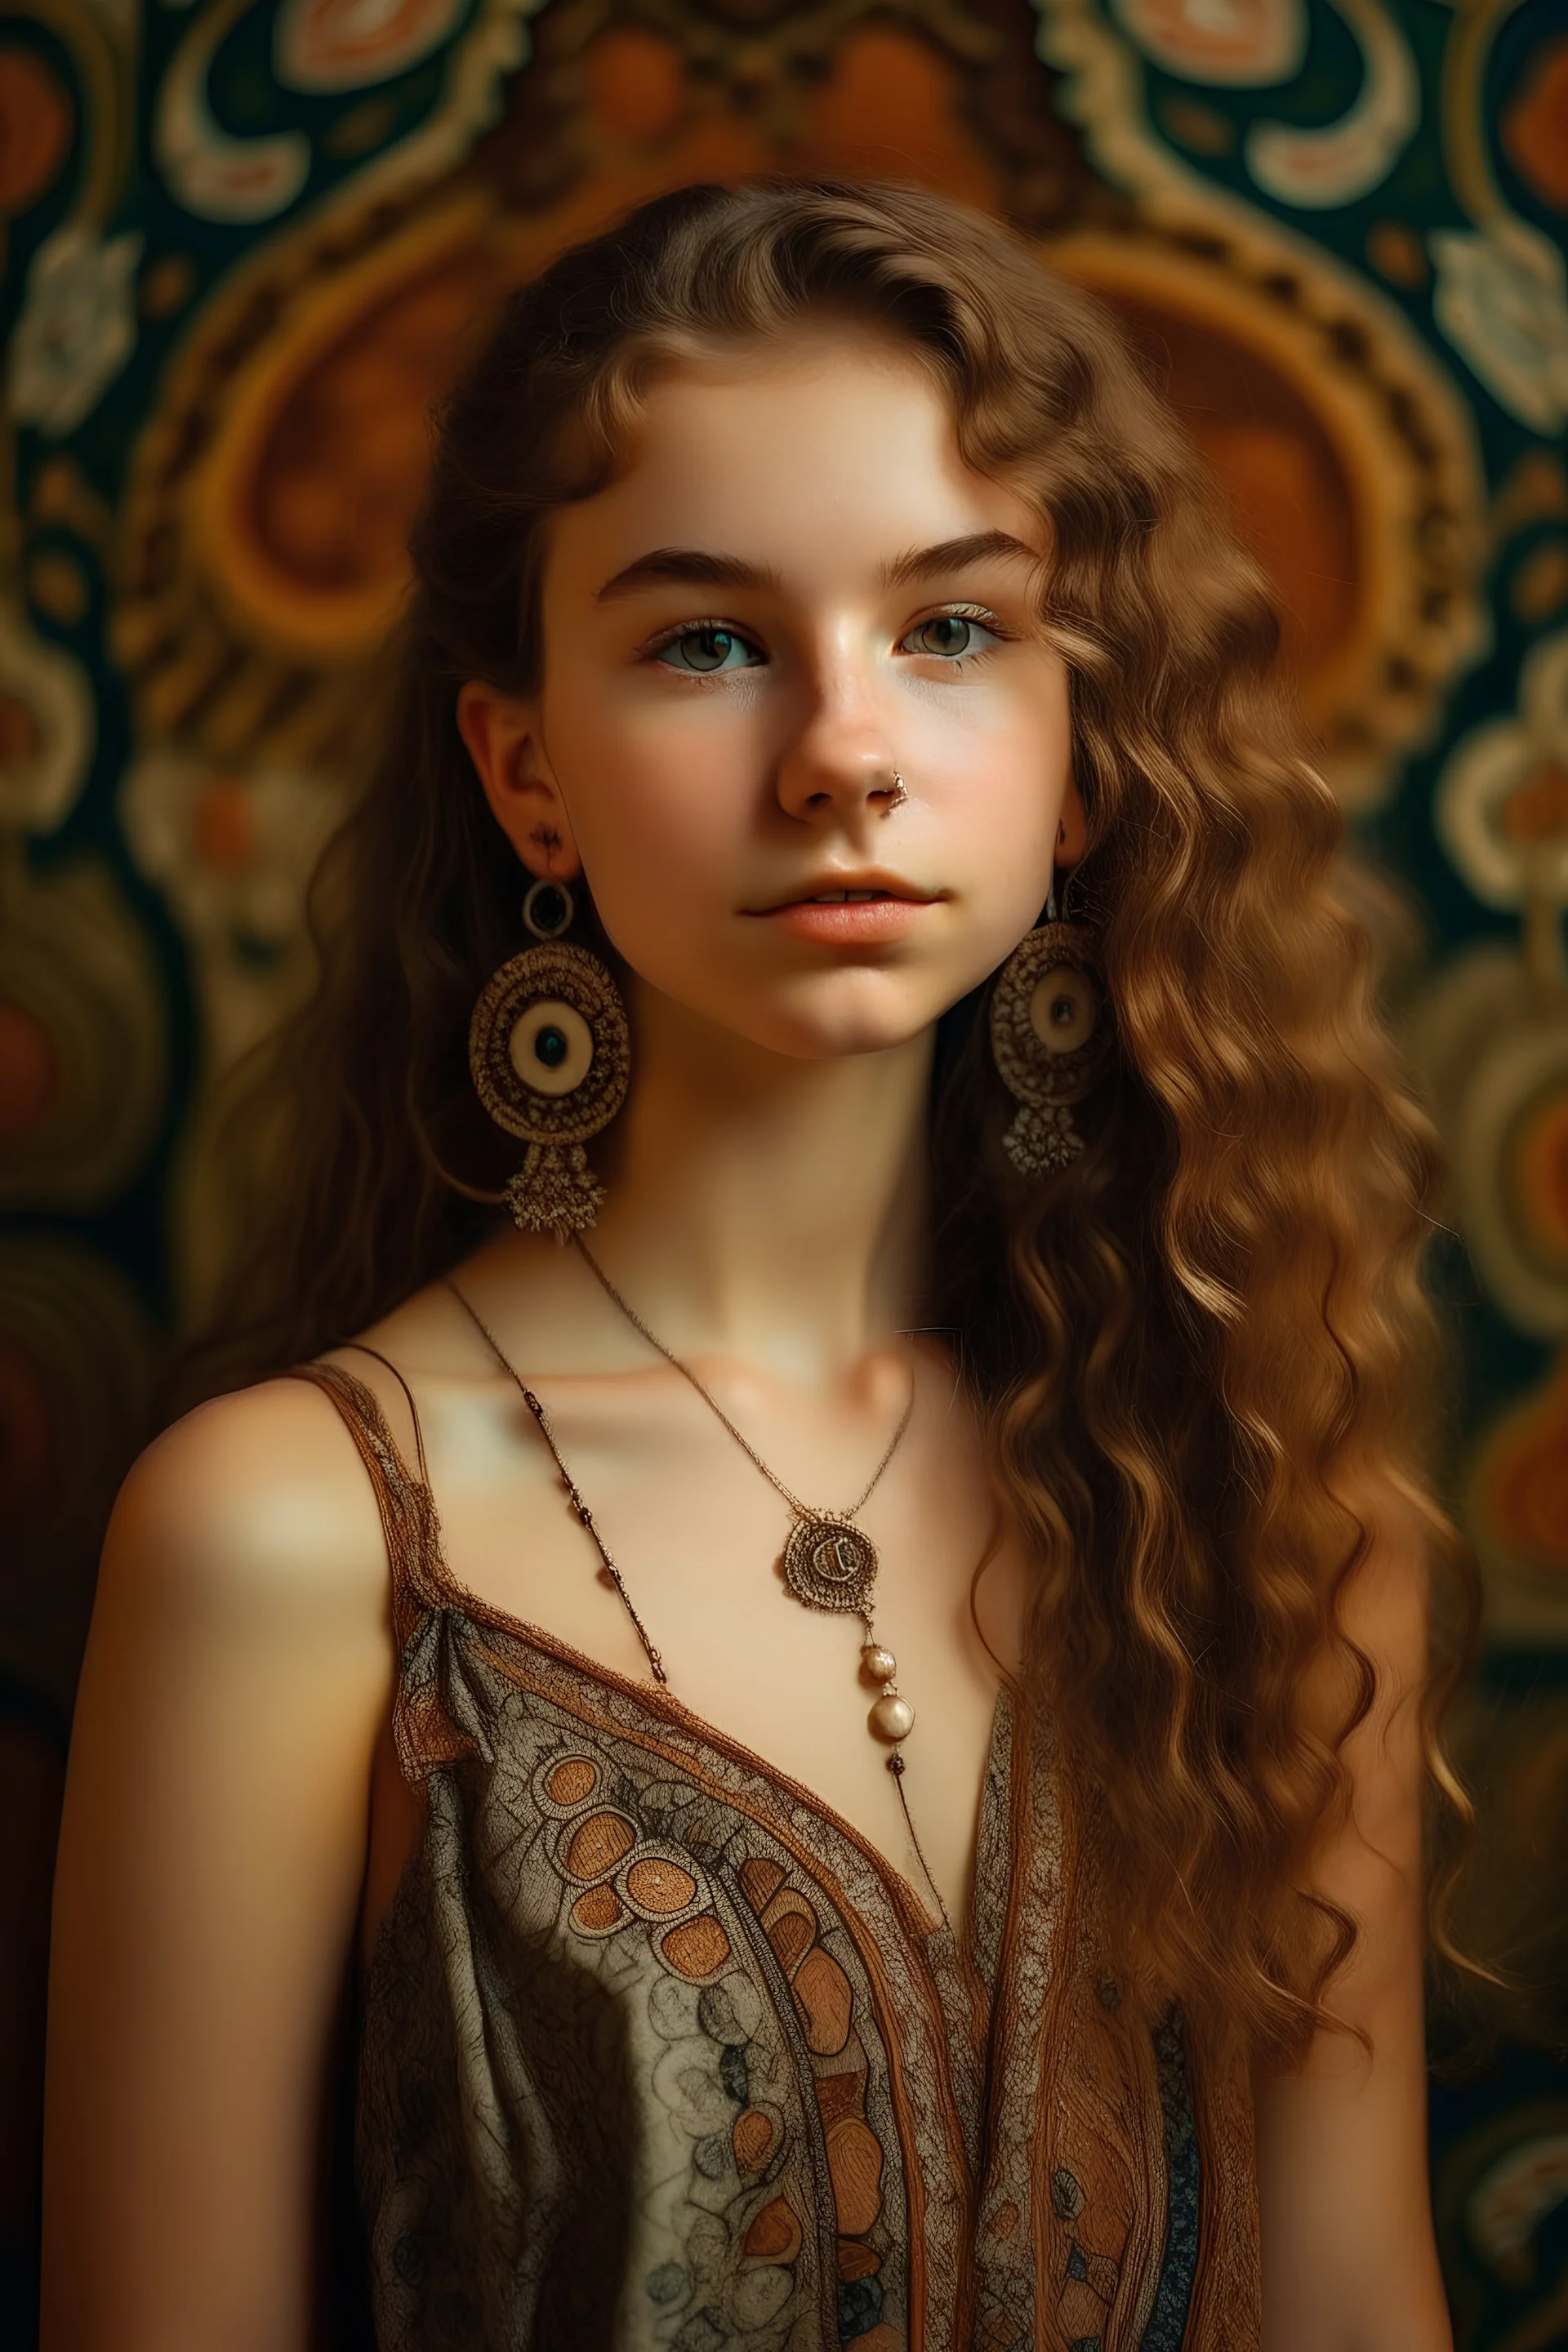 girl, carved earrings, jewelry, open ear, curly hair, long hair, tapestry background, half-turn, dress with straps, photo portrait, close-up, looking at the camera, ear with earring clearly visible, hair pulled back from ear